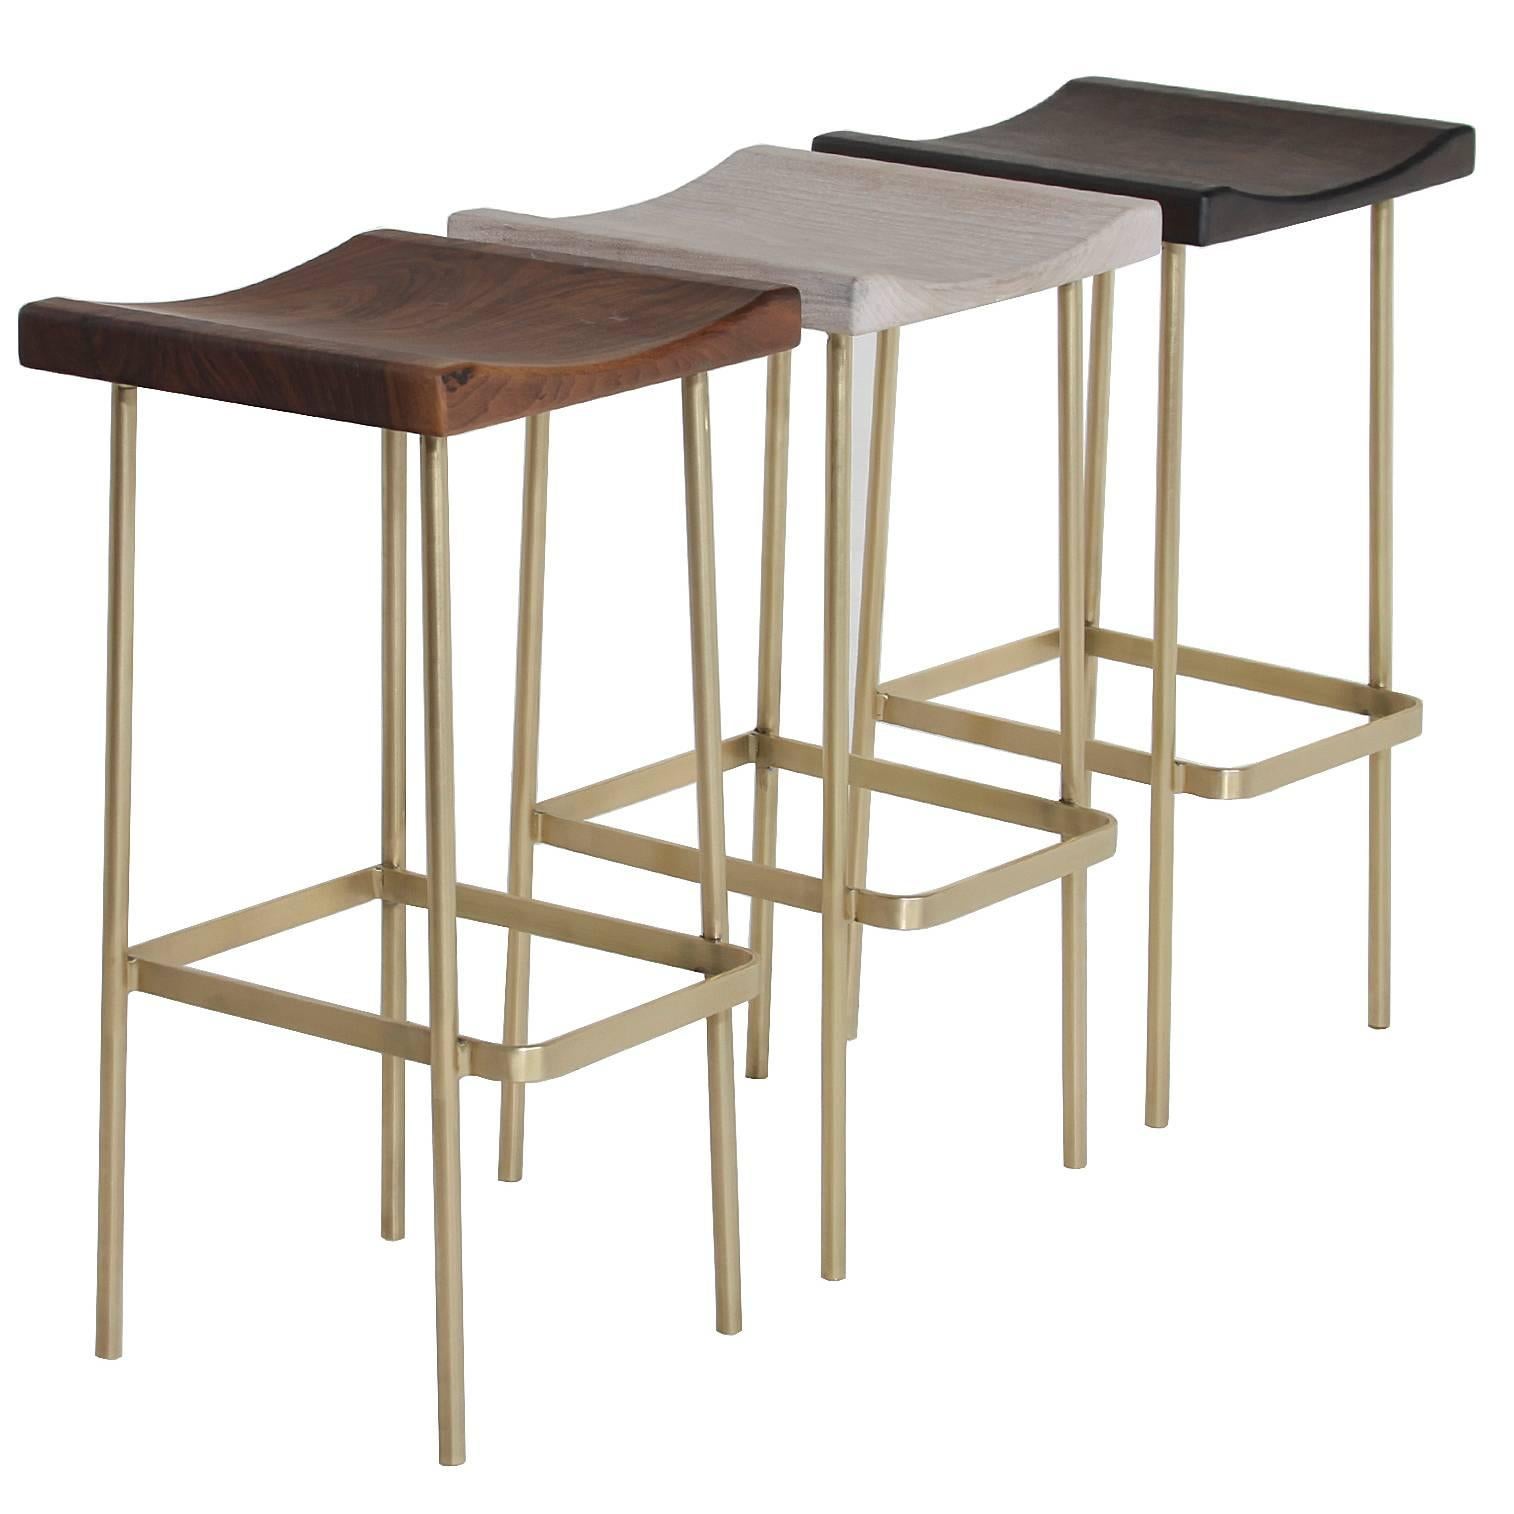 The Bundinha stool by Thomas Hayes Studio with brass frame, with a variety of wood tops and a curved flat bar footrest. A smaller version of our Bunda stool with a comfortable contoured square seat. Finishes from left to right: Pure oil bleached,